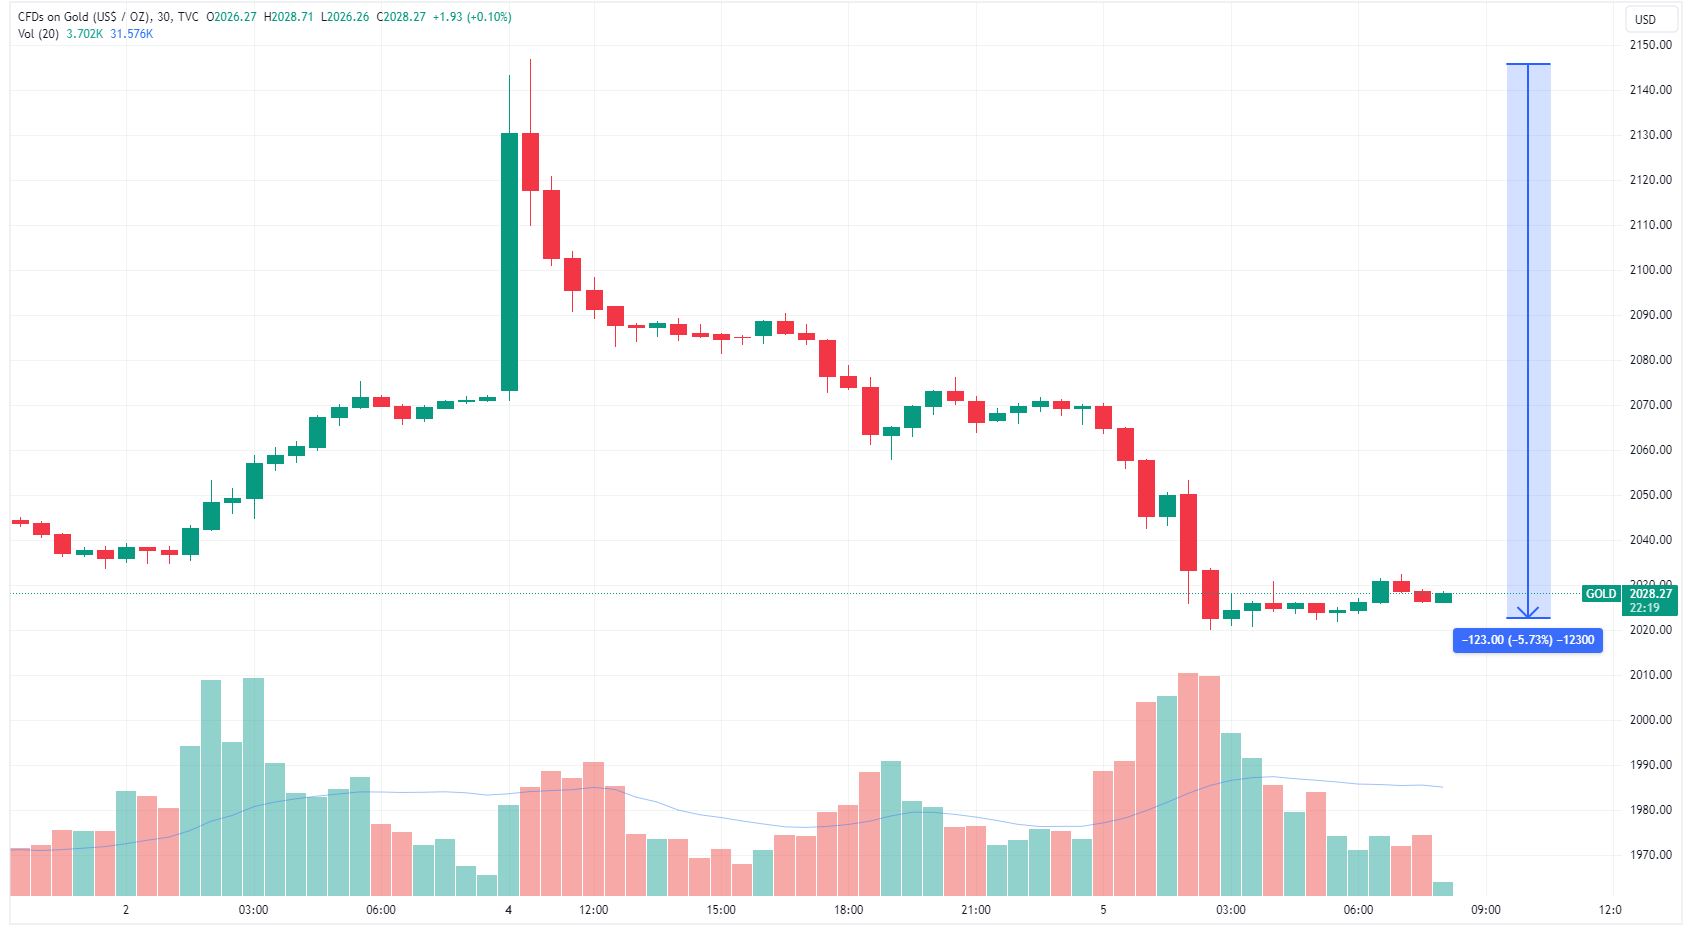 Gold 30 minute chart (Source: TradingView)